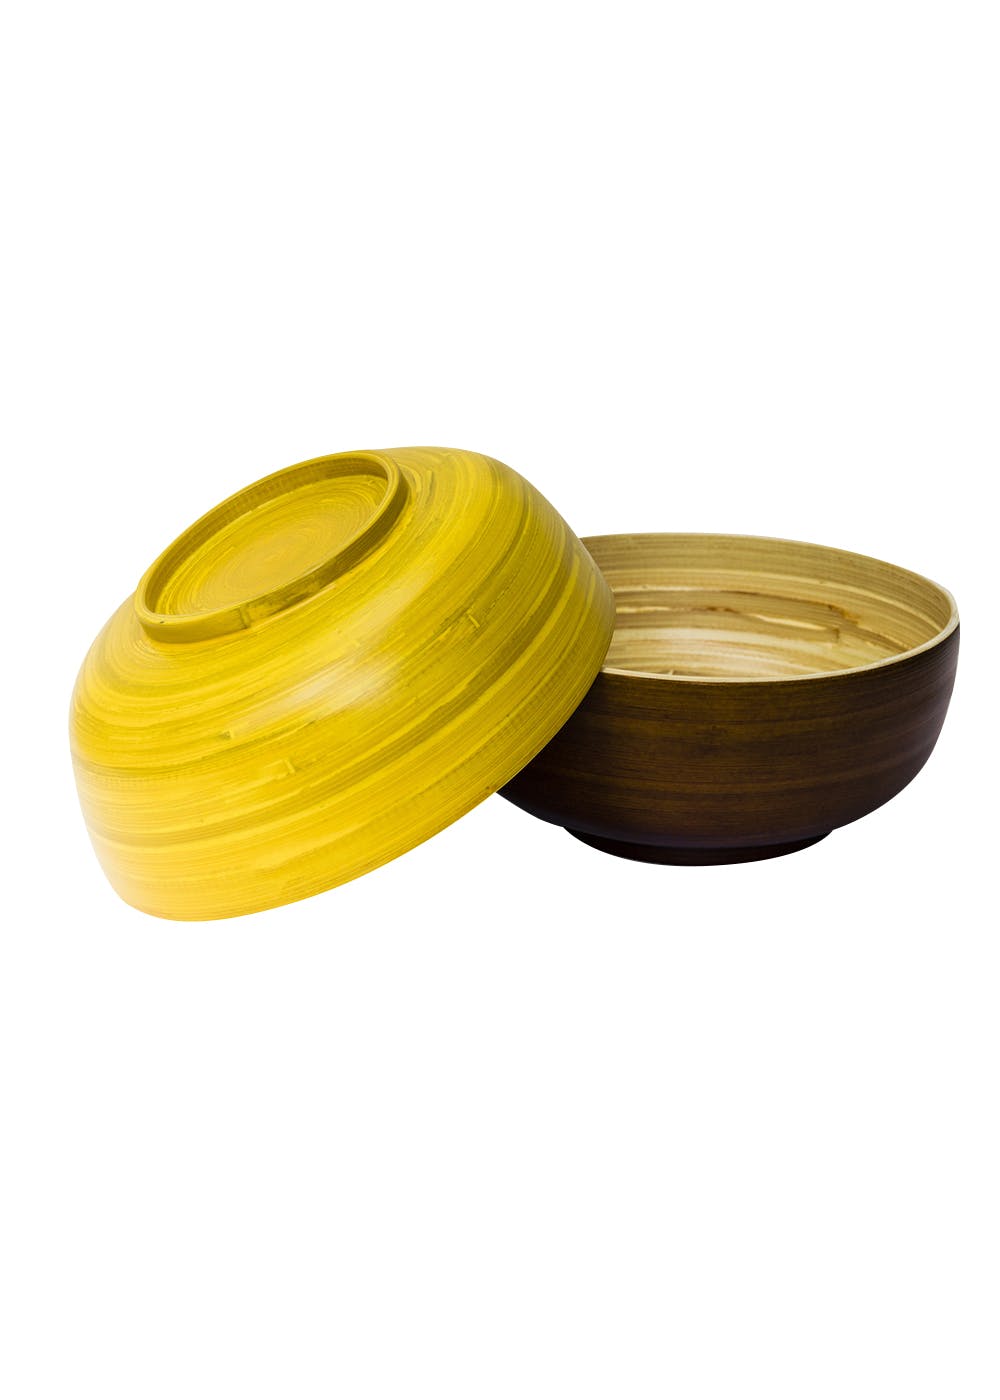 Bamboo Bowl SM - Set of 2 (Brown and Yellow)